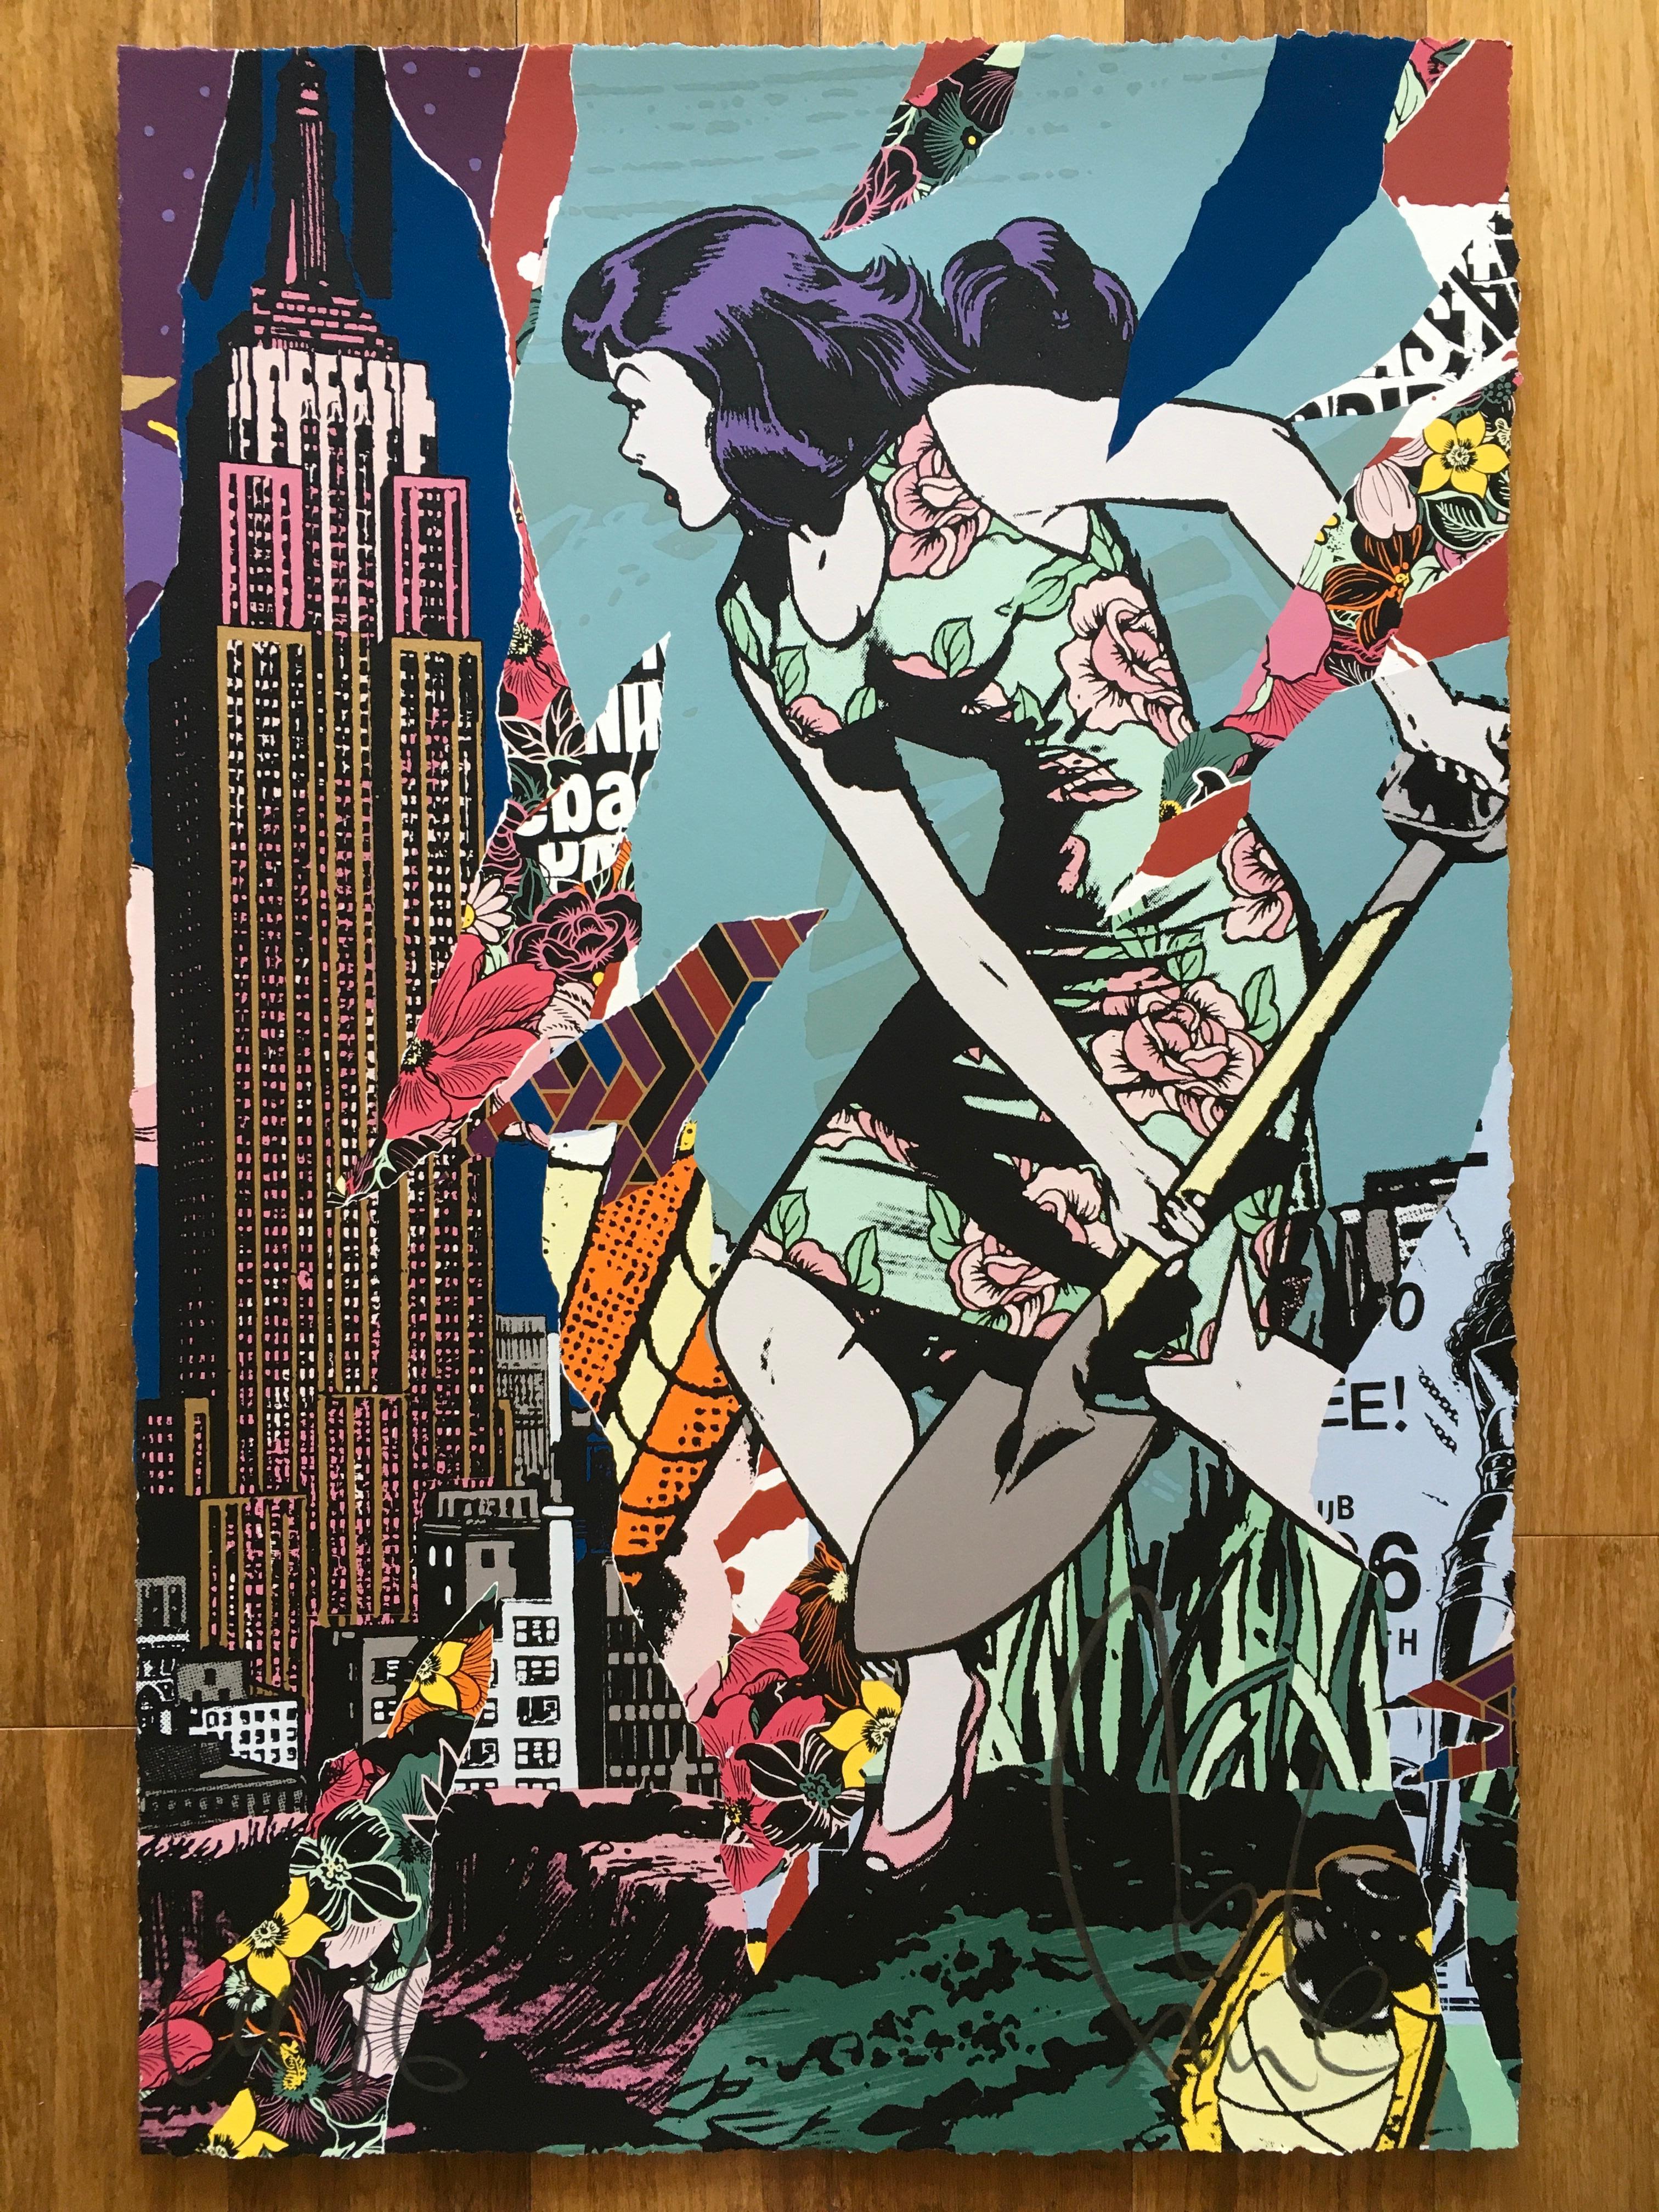 Faile Figurative Print - "Bad Seeds" 24 Color Silkscreen Print, Limited Edition, SSYM Series